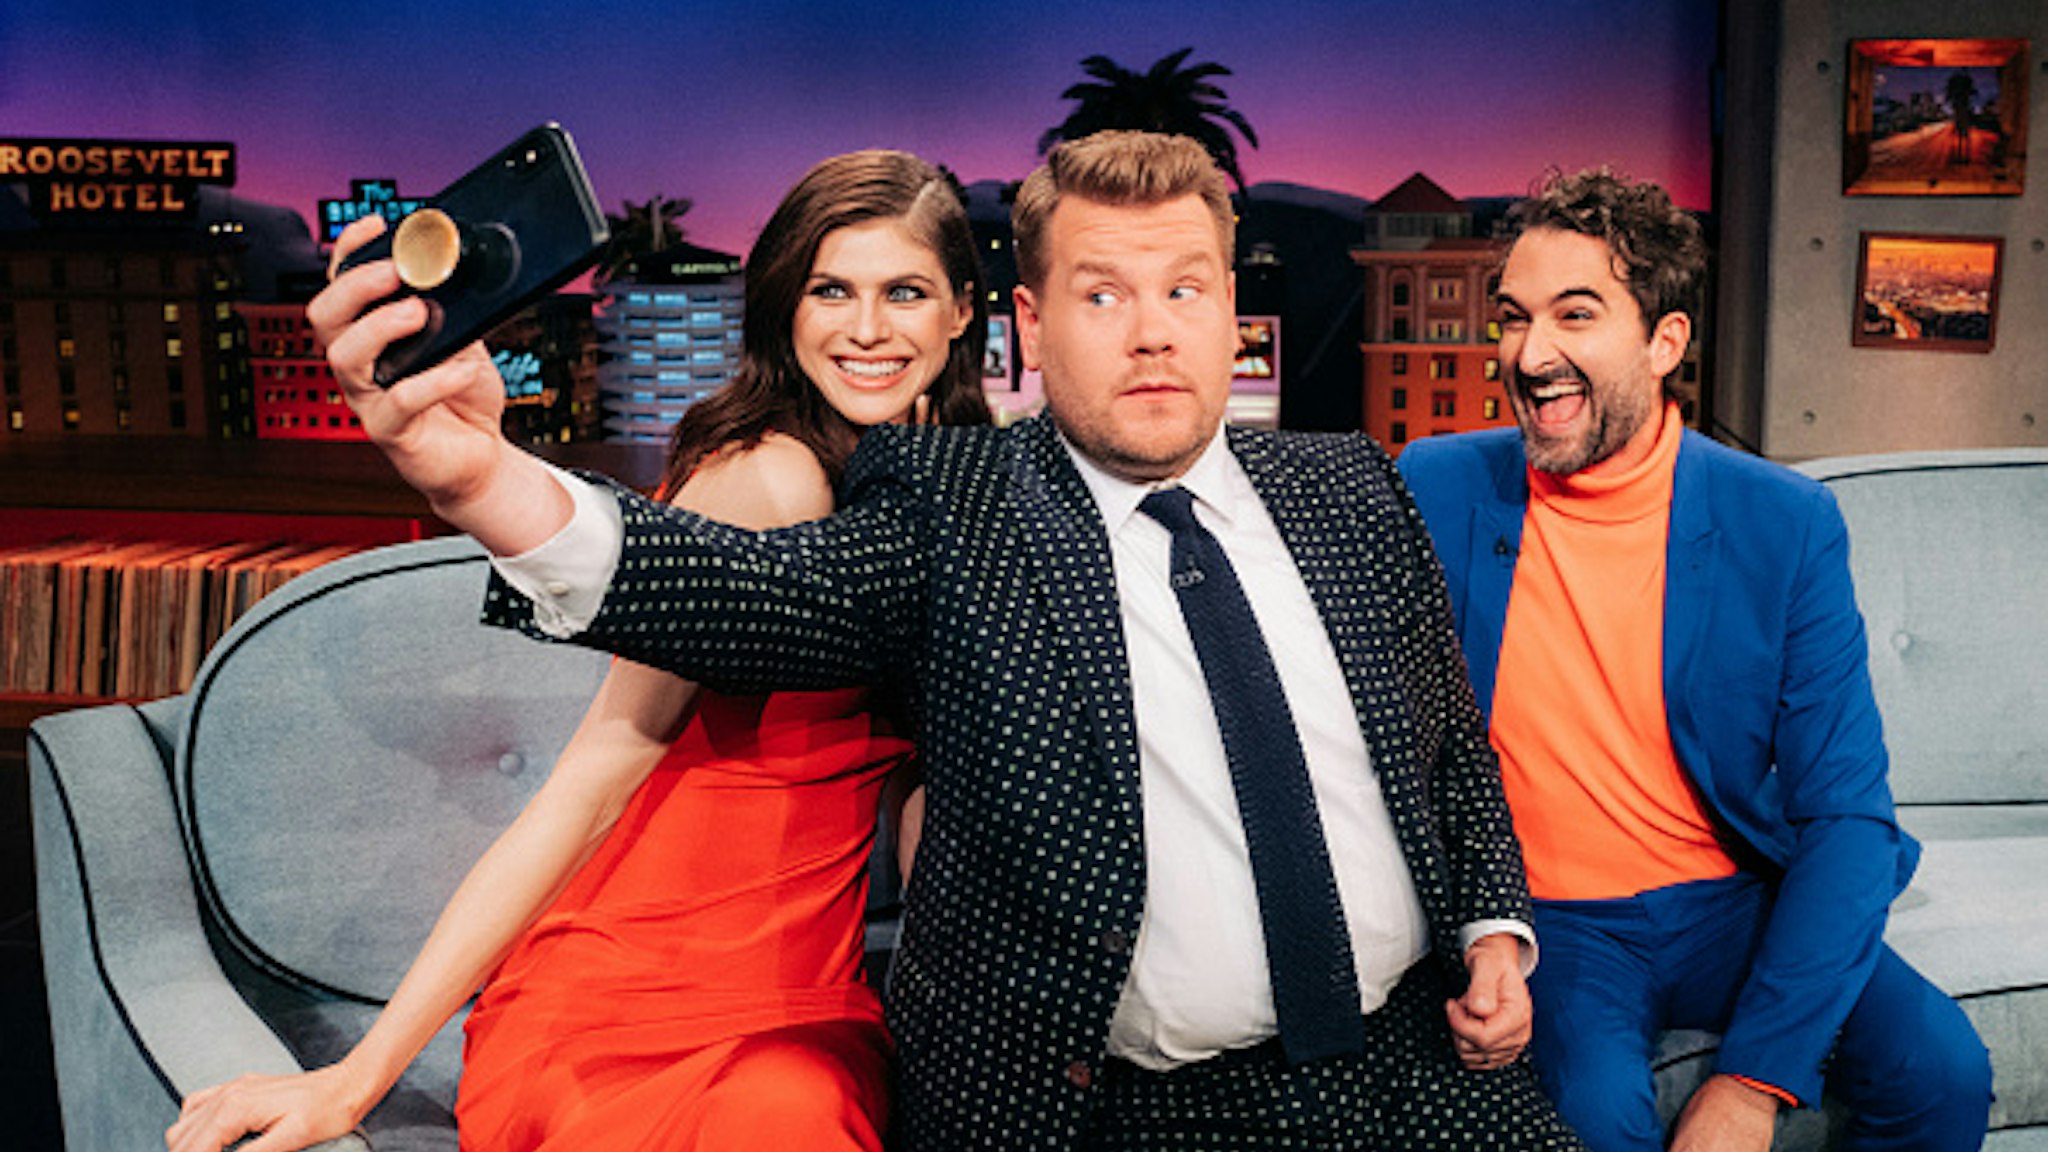 The Late Late Show with James Corden airing Wednesday, September 11, 2019